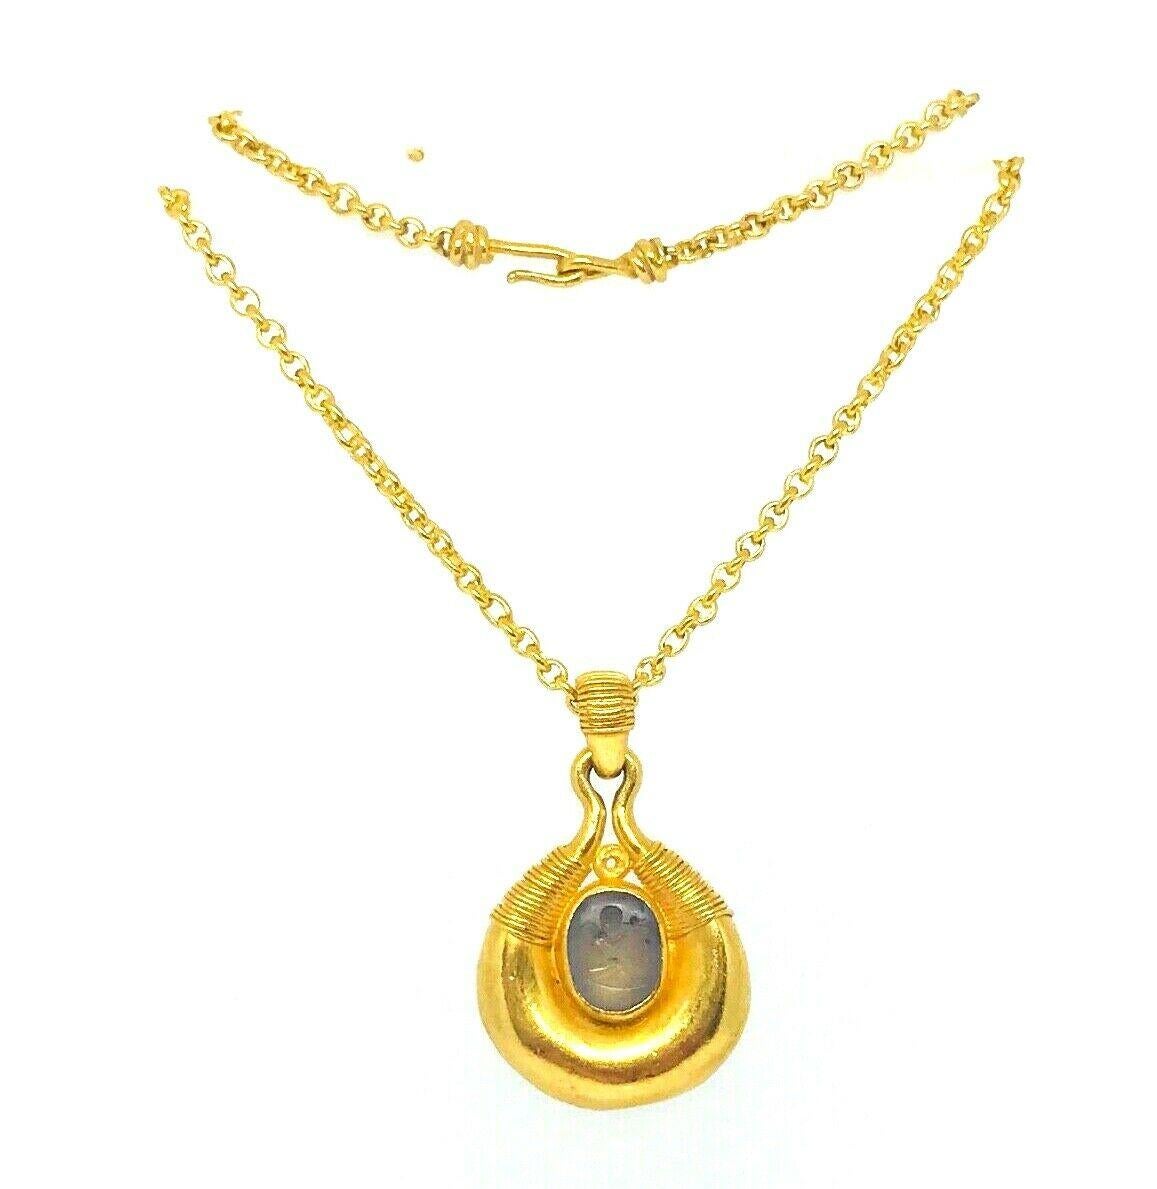 Vintage (c.1930s) Egyptian revival 22k yellow gold chain necklace with a carved crystal circle pendant. The chain features a hook-and-eye closure. The pendant has a carved cherub image and the gold wires wrapped around elements.
Measurements: the